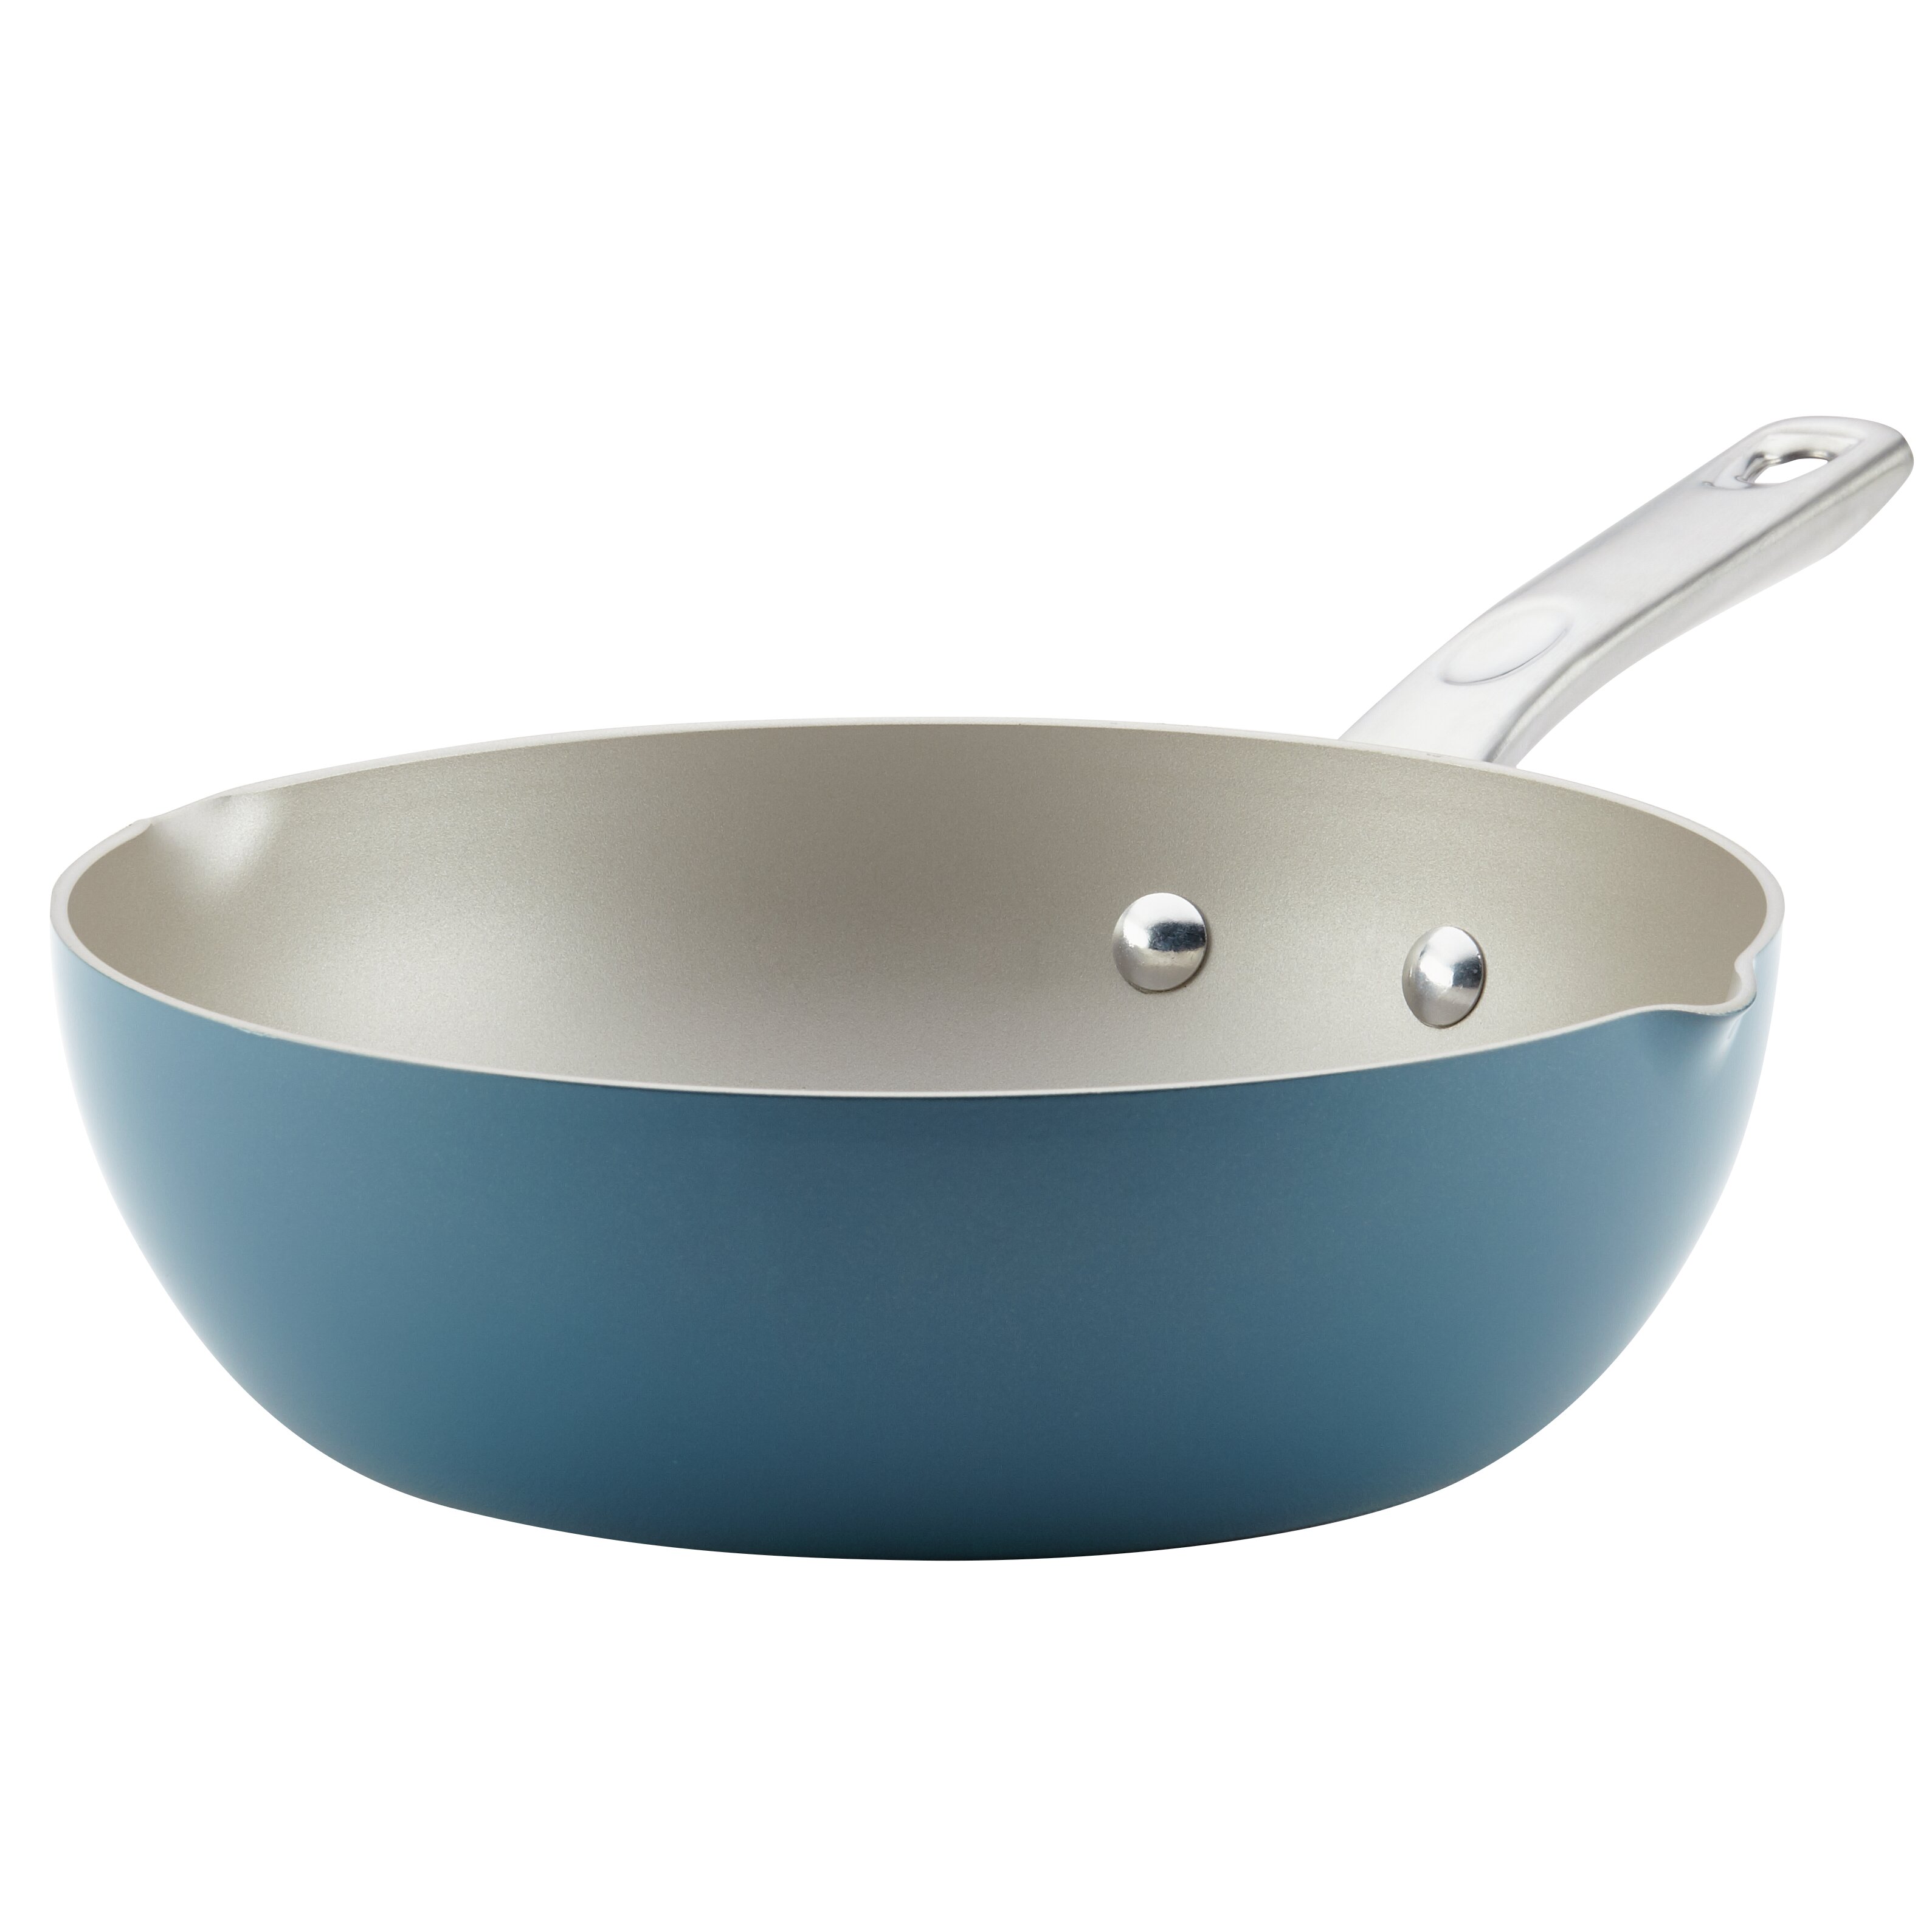 Ayesha Deep Skillet, Covered, Hard-Anodized, 12 Inch